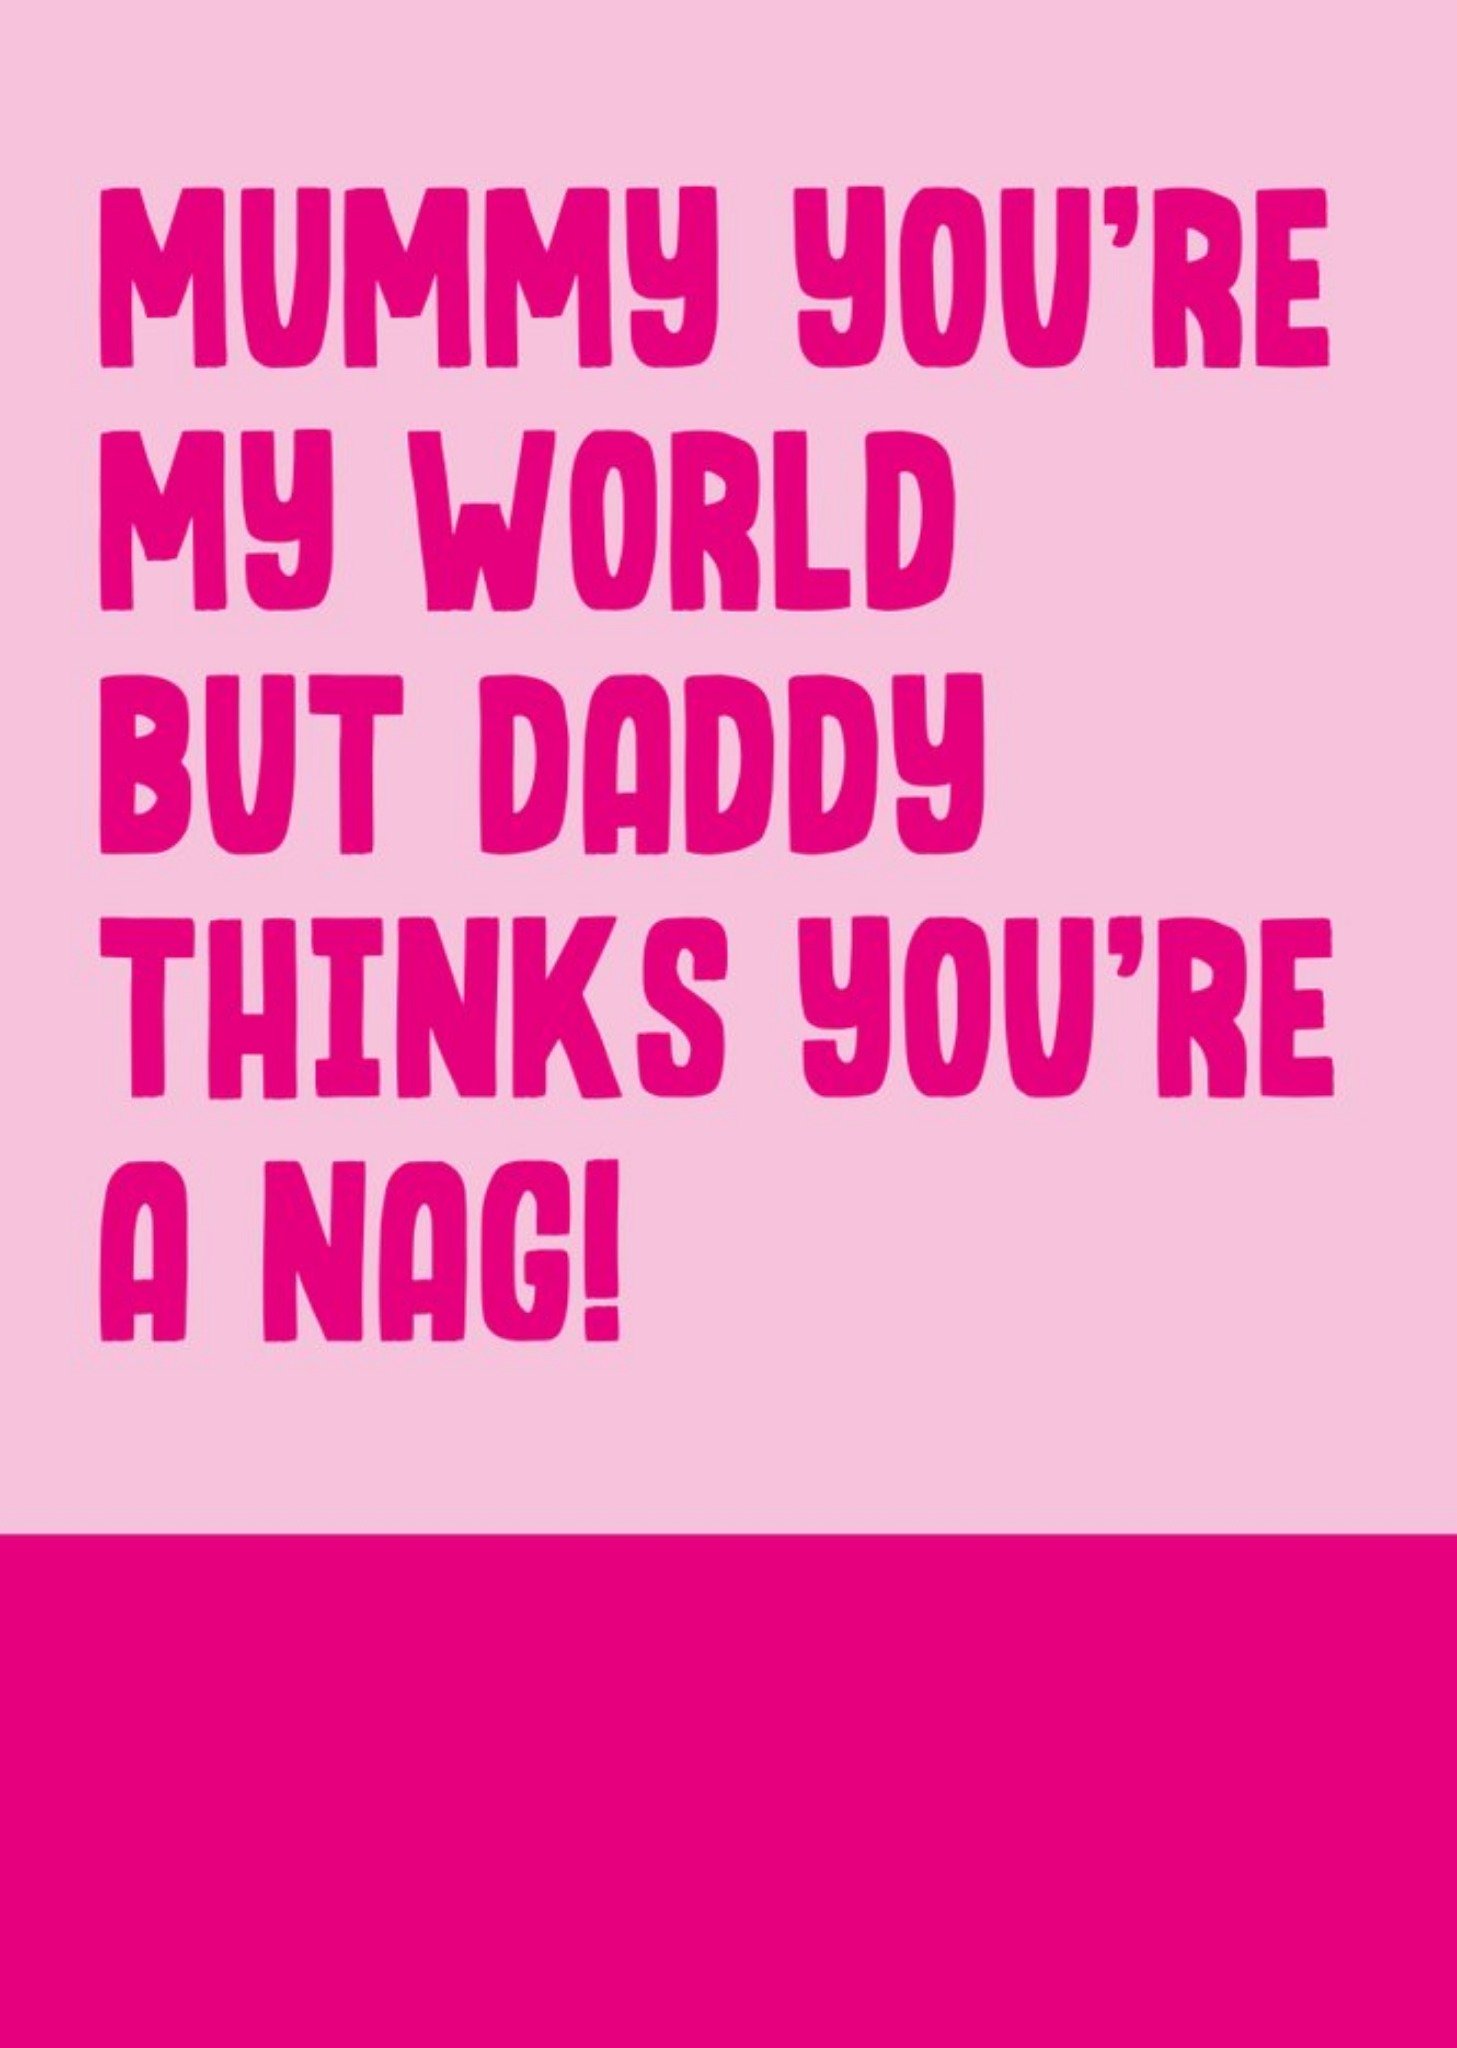 Moonpig Daddy Thinks You Are A Nag Card Ecard